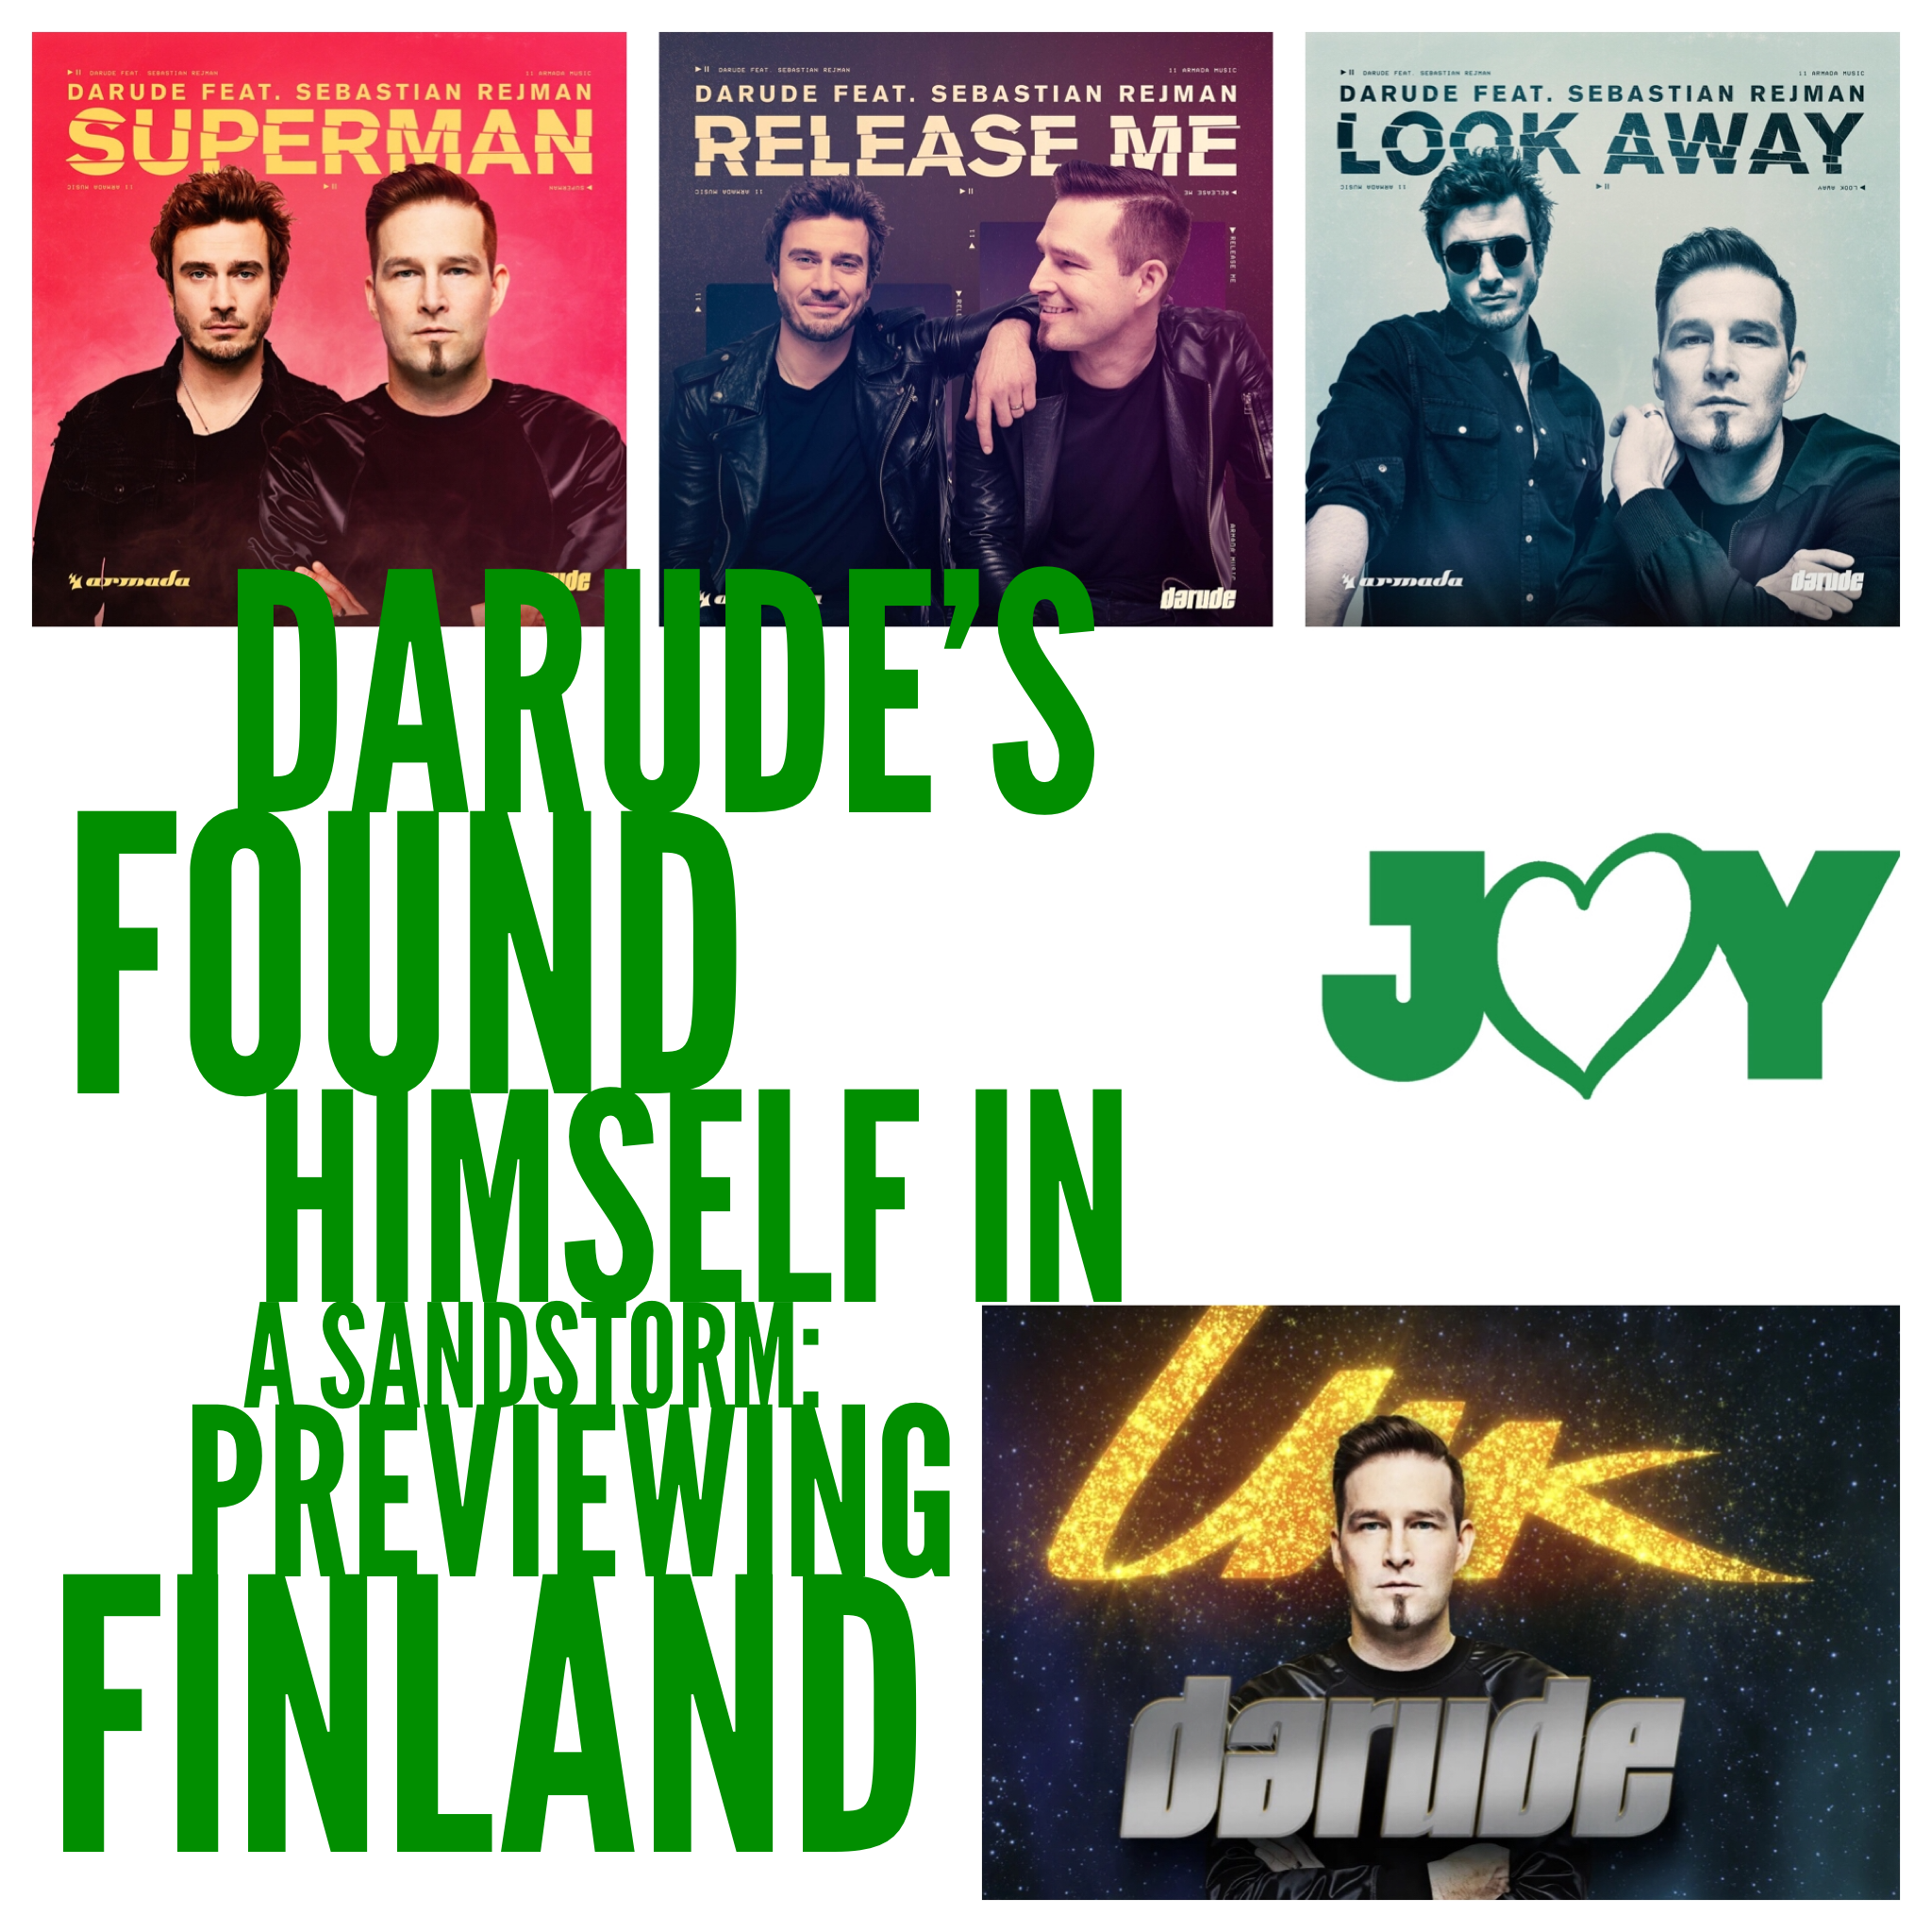 Darude’s found himself in a sandstorm: Previewing Finland’s UMK